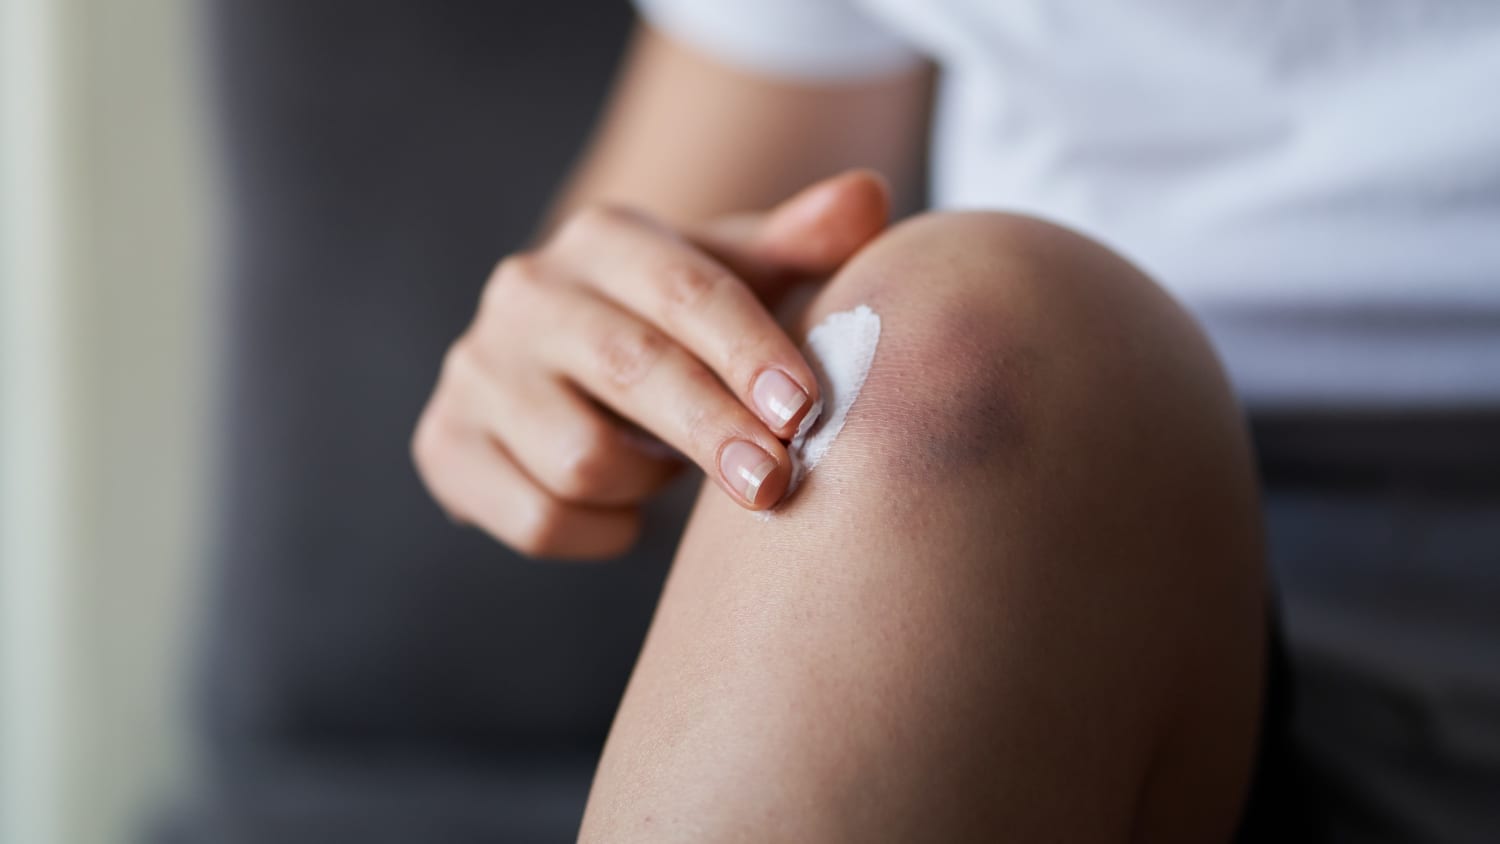 person who bruises easily from bleeding disorders putting on cream